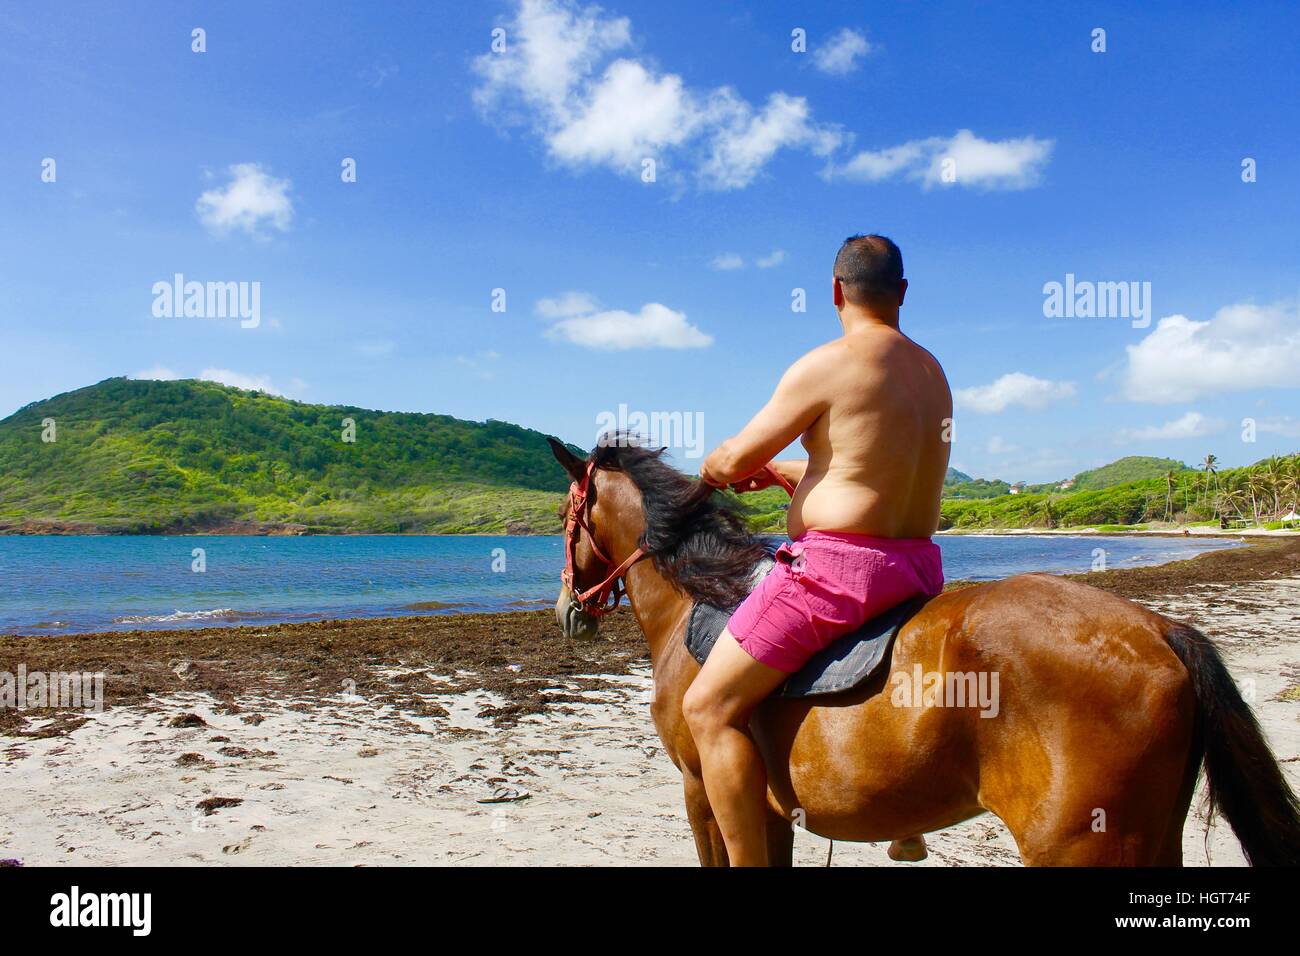 Adventure of a Life Time Stock Photo